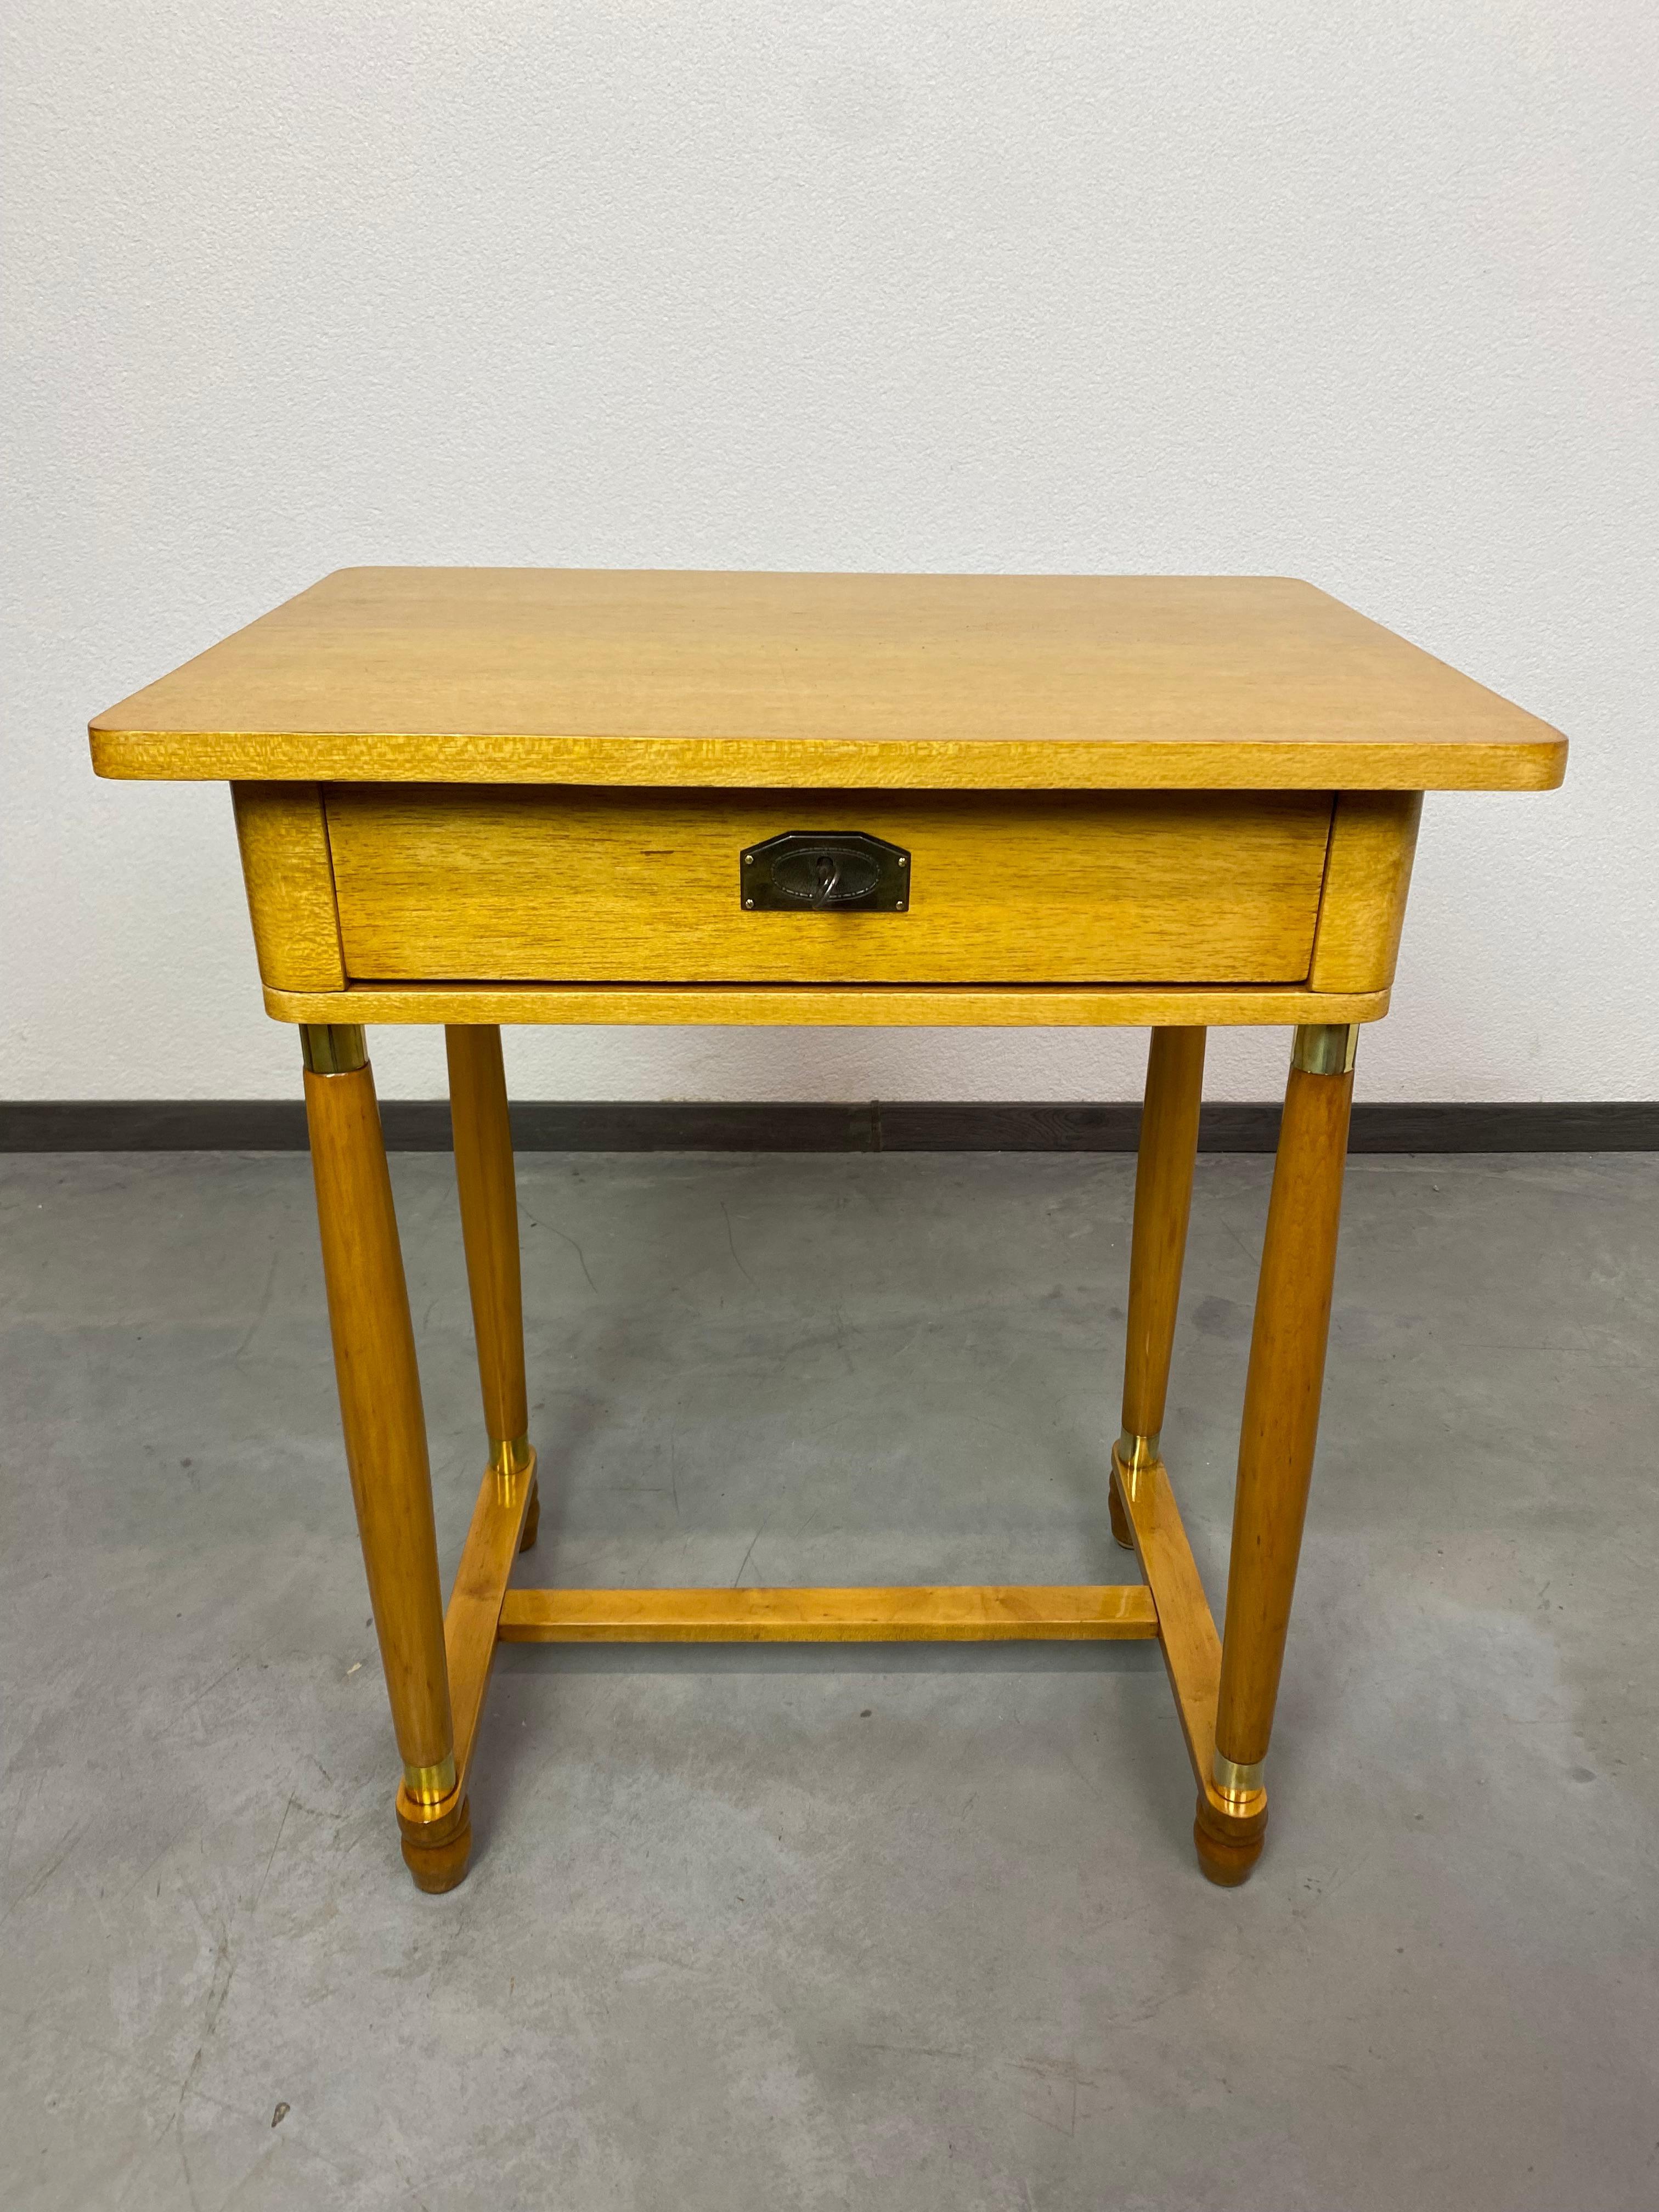 Yellow art deco side table, professionally stained and repolished.
